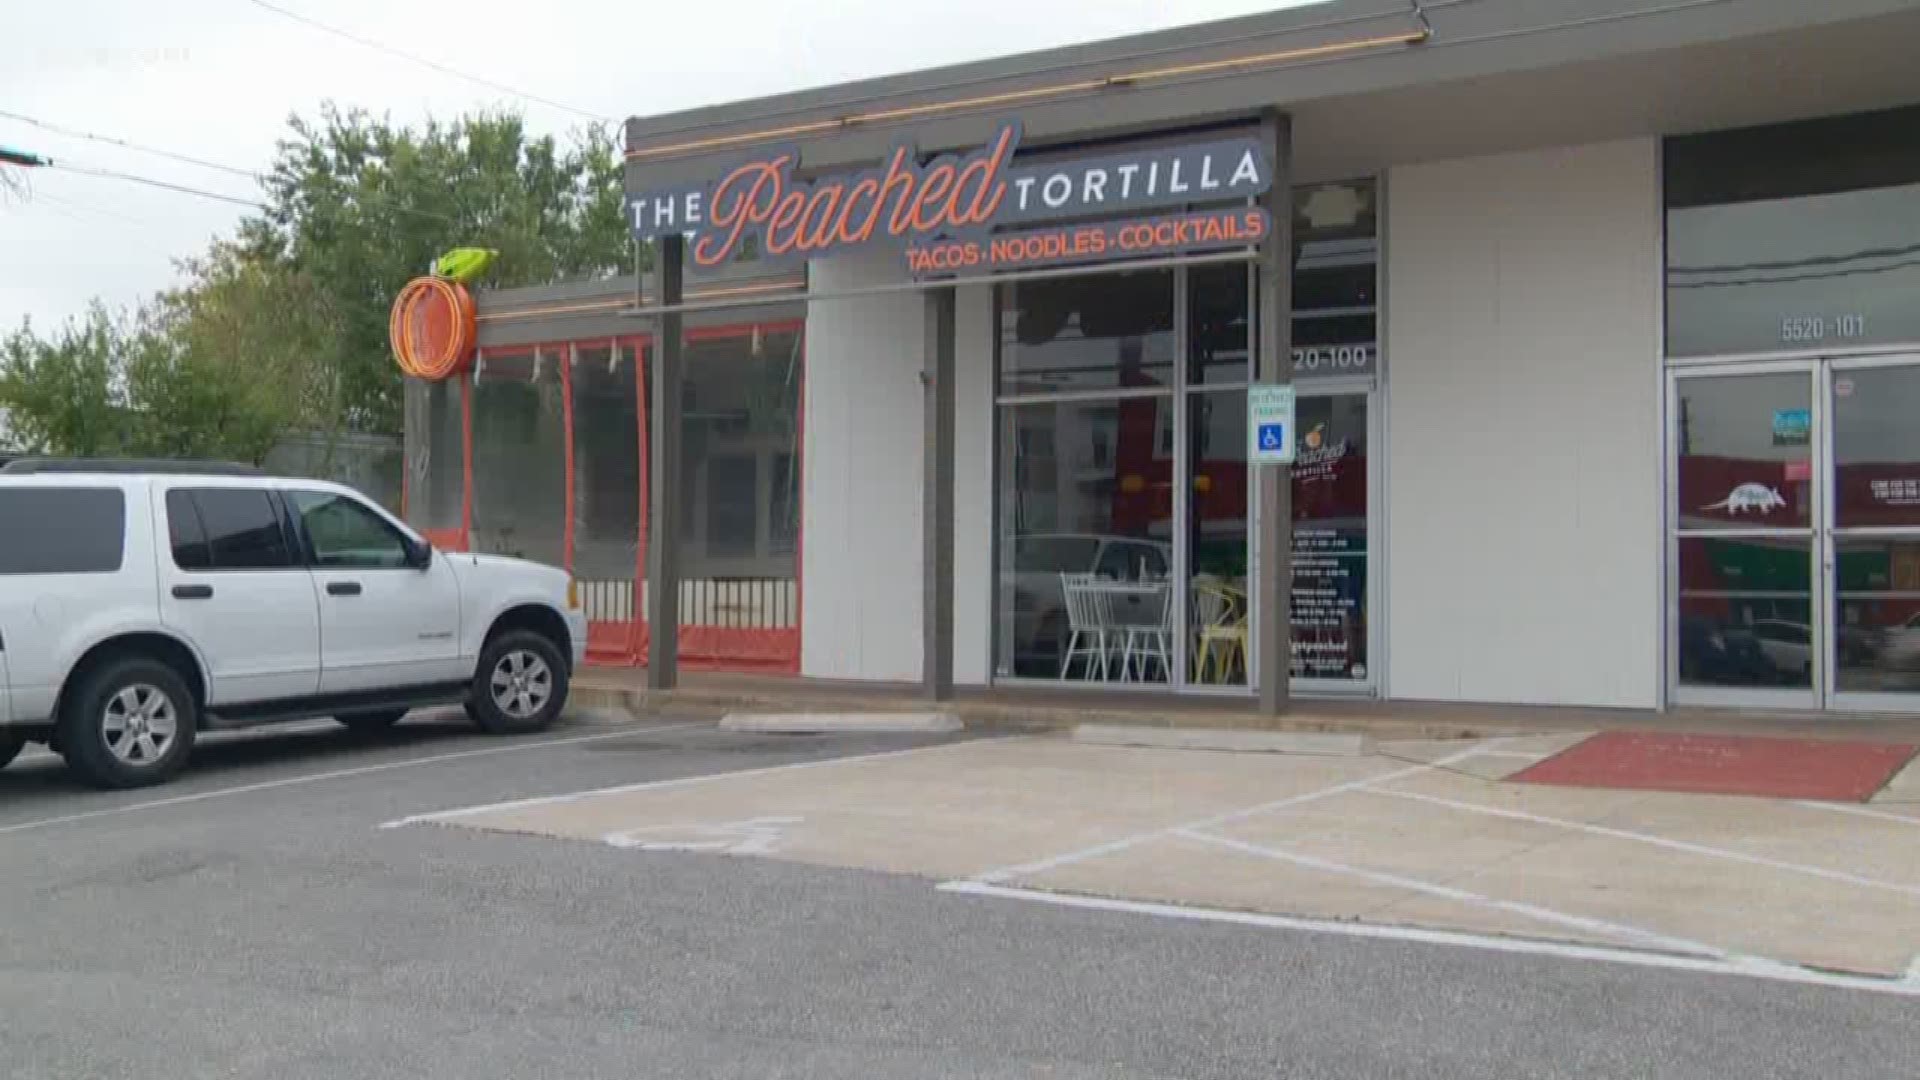 The Peached Tortilla is one of the restaurants from Austin's food truck boom that saw such success it expanded to a brick-and-mortar location.